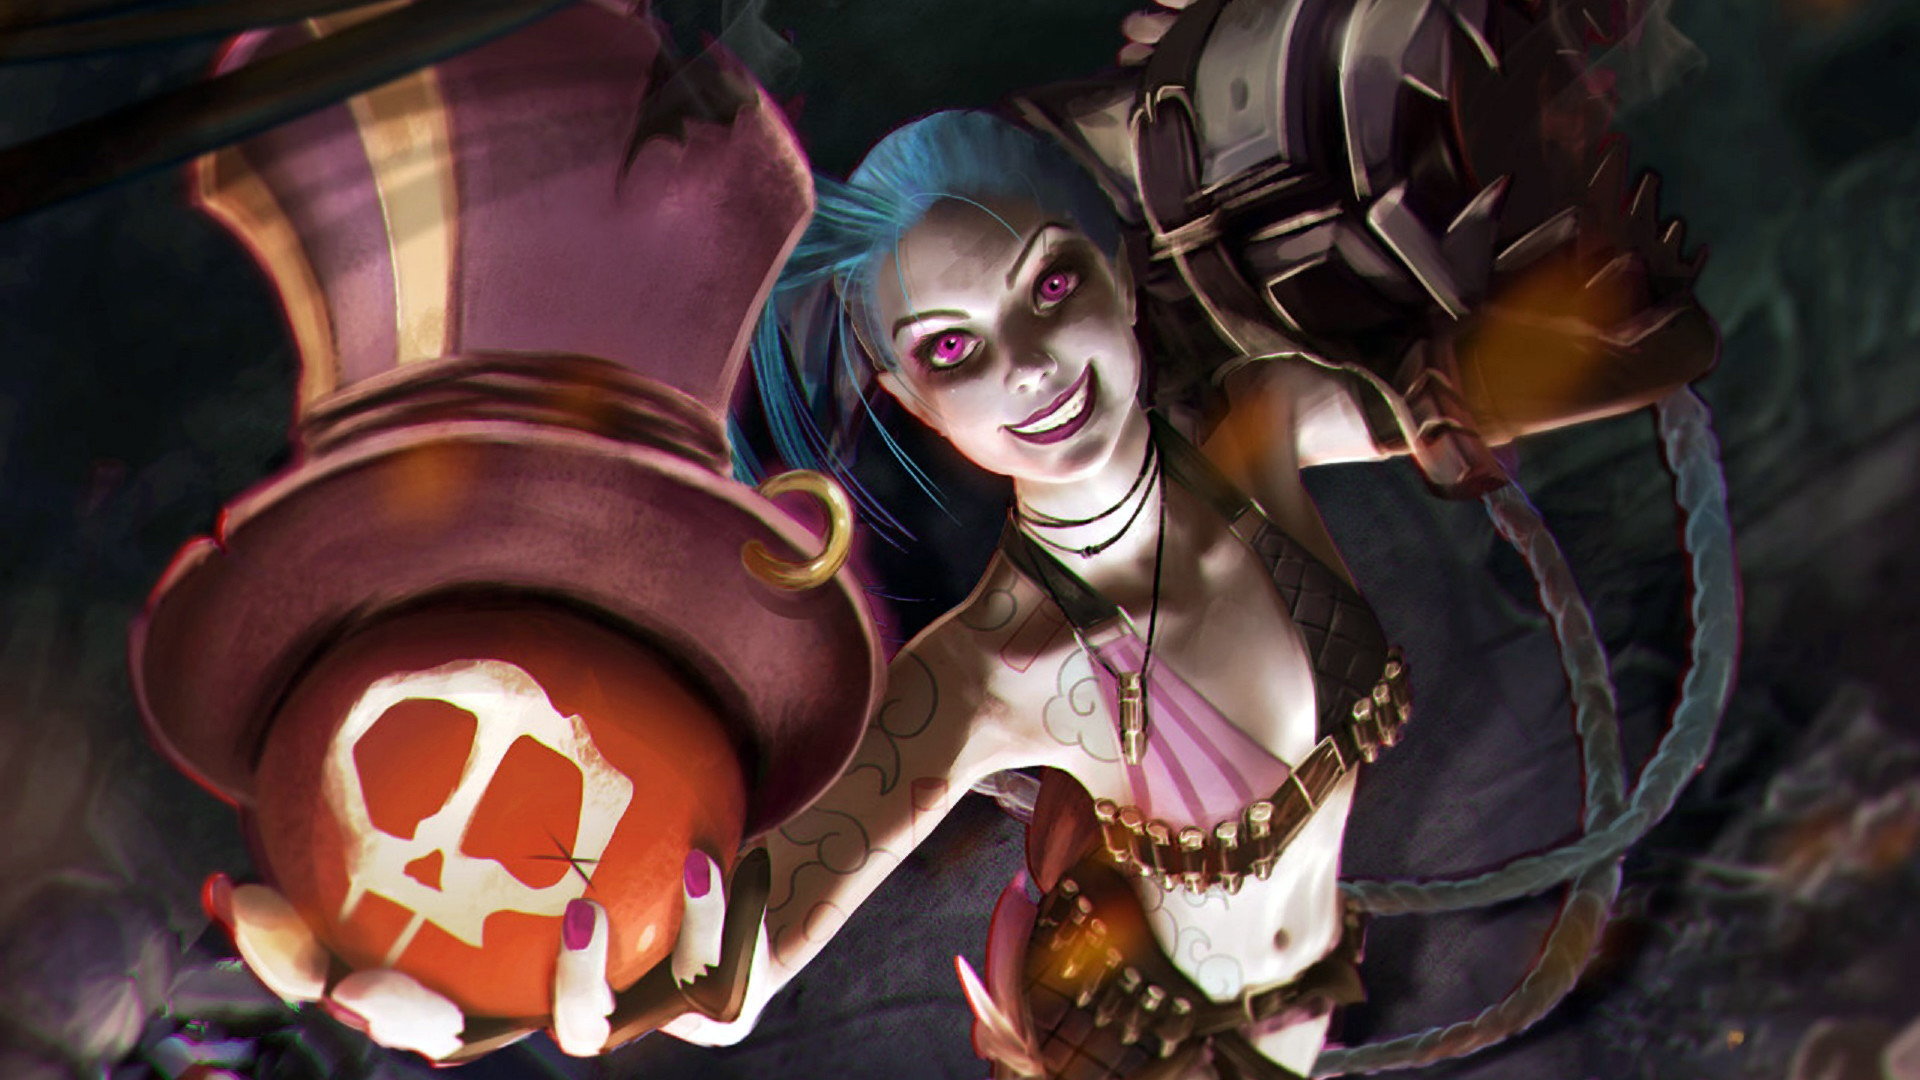 Wallpapers jinx lol jinx bomb girl league of legends game 1080p hd wallpaper and